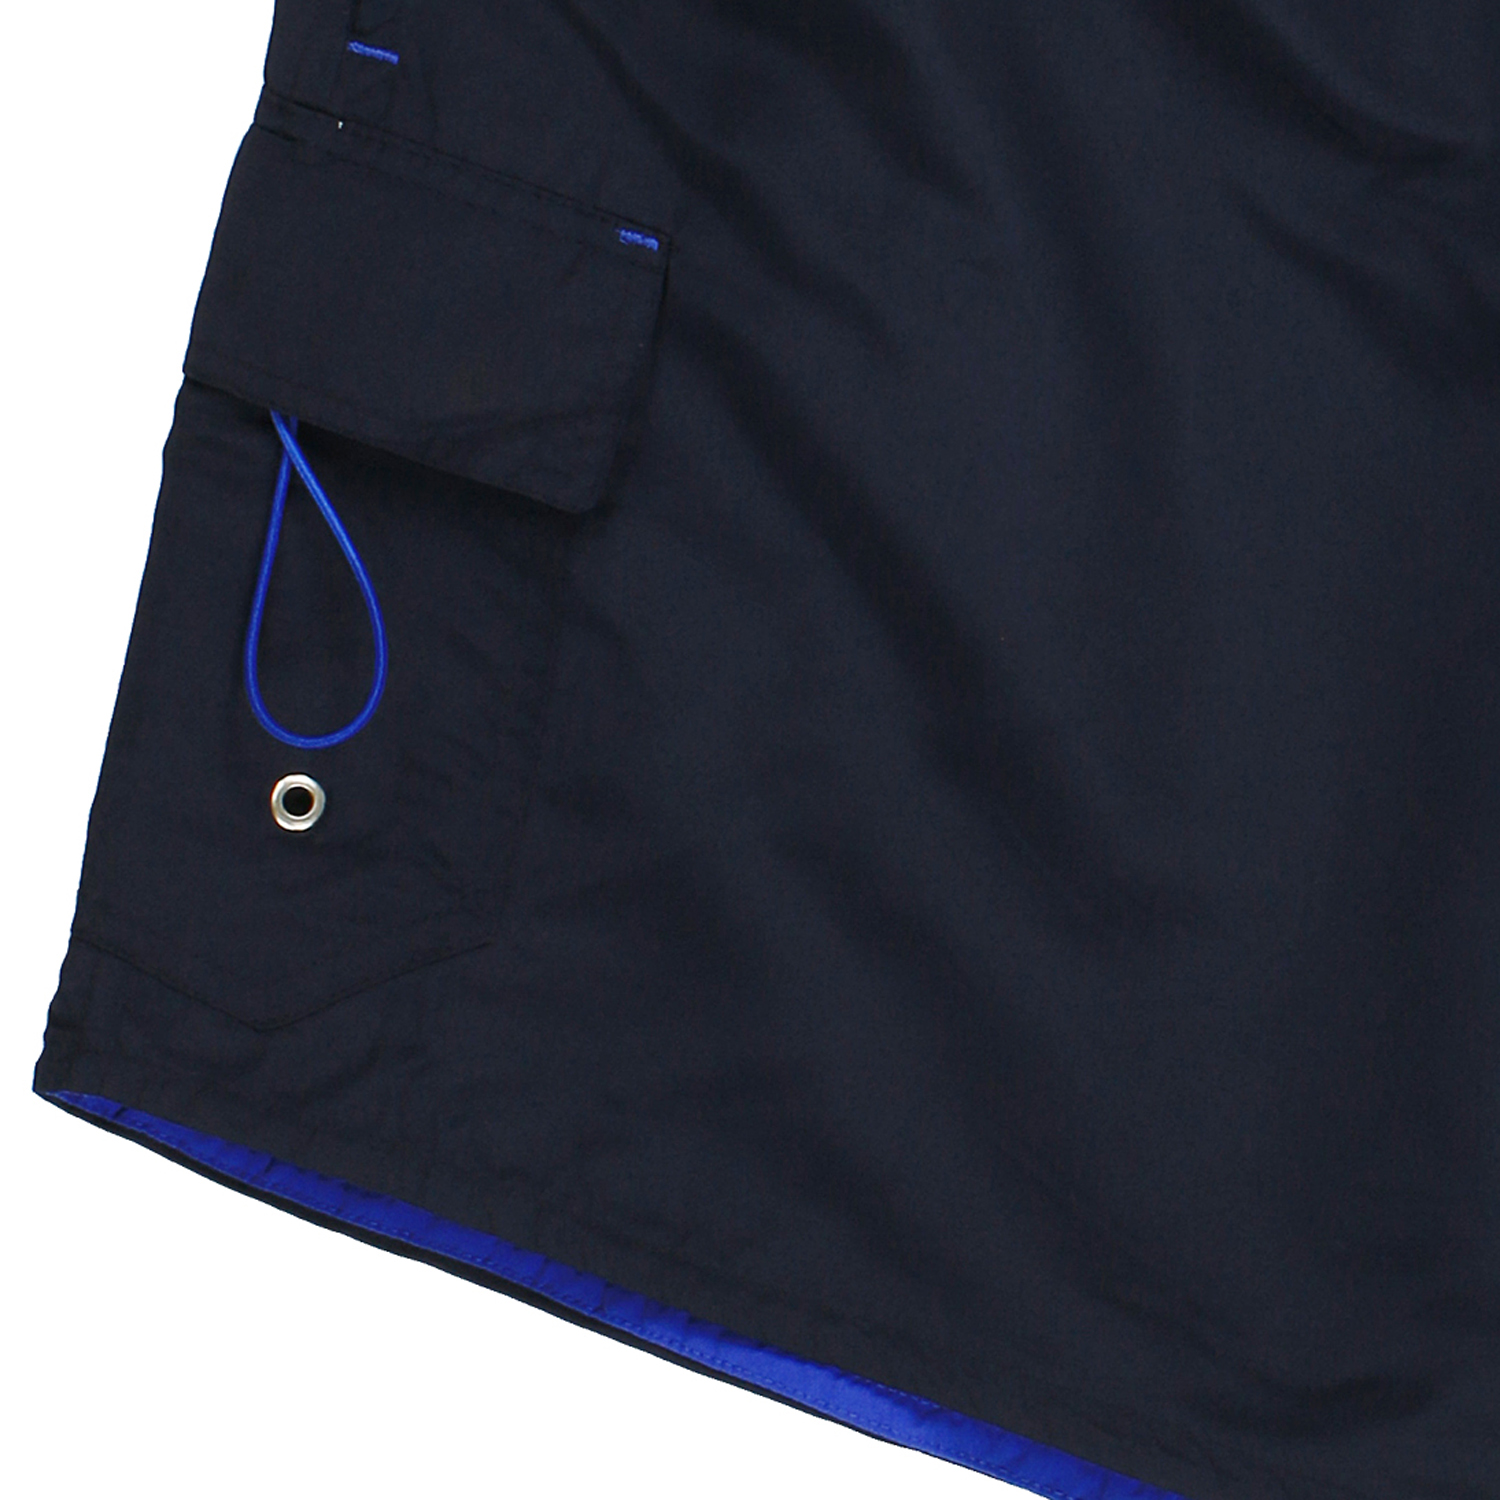 Swim shorts "Barbados" for men by Adamo in dark blue up to oversize 10XL